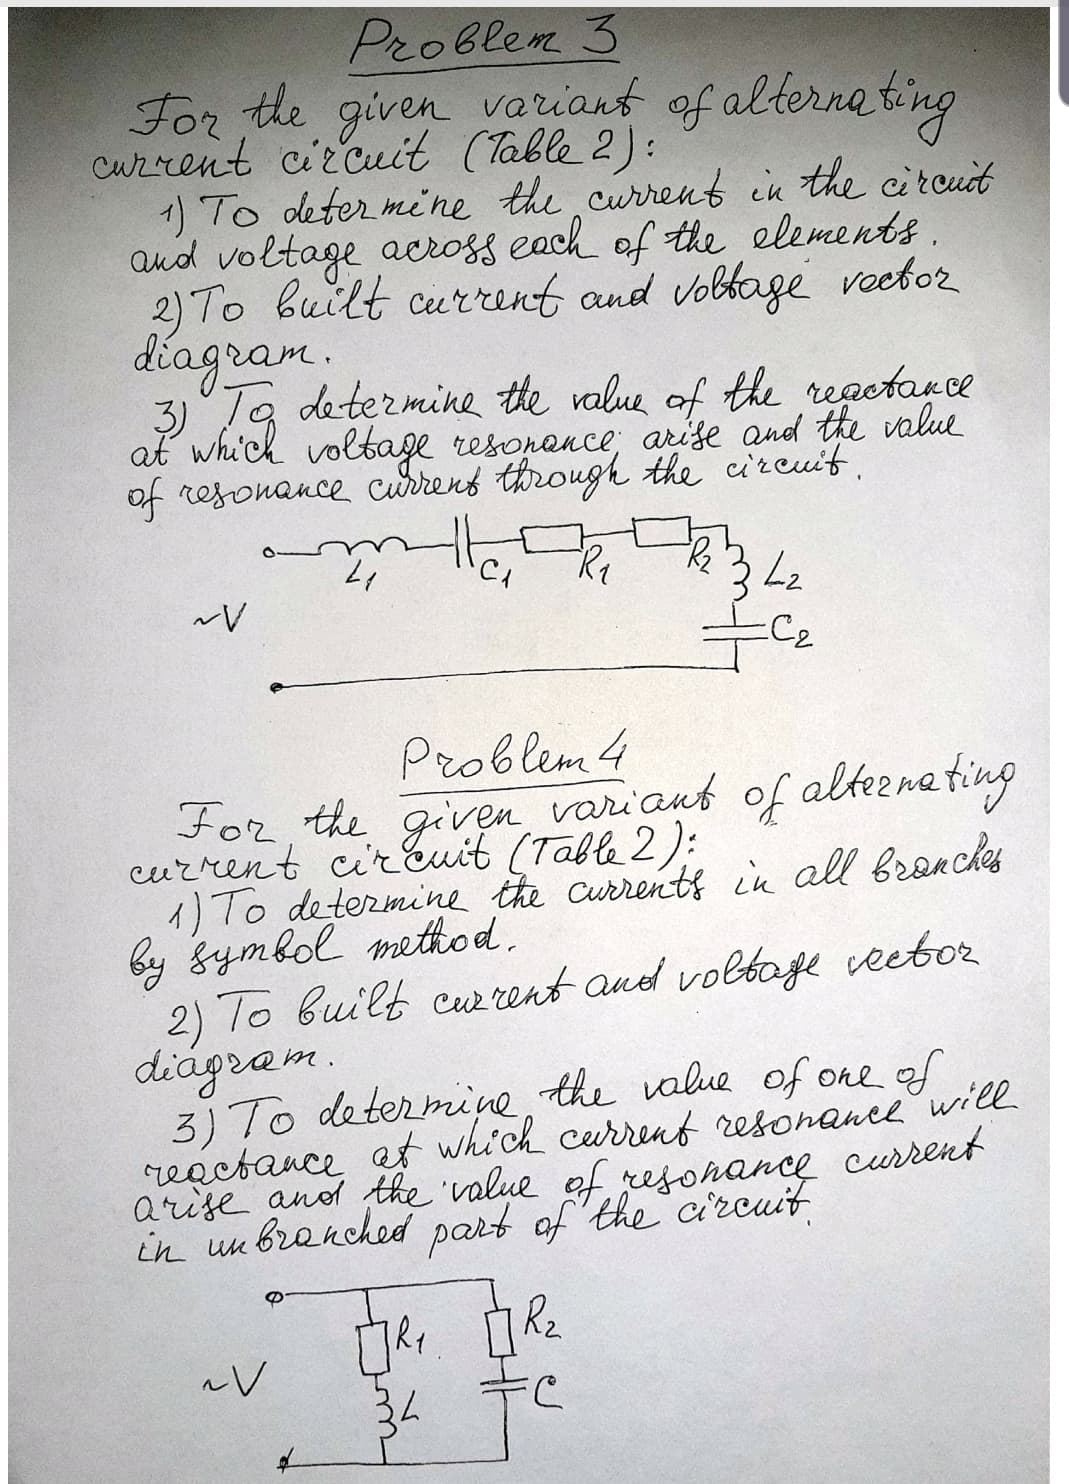 Problem 3
veriant of alternating
For the given
Current circuit (Table 2):
1) To deter mine the current in the circuit
aud voltage across each of the elements.
2) To built current and vobbage veetor
diagram.
Ta determine the value of the regetarce
3)
at whi'ch voltage resonance; arise and the value
of resonance currens through the cireuit,
342
C2
Problem 4
For, the given variant of alteena ting
current cir Euit (Table 2):
1) To determine the currenti in all branches
by gymbol method.
2) To built cw rent and voltage veebor
diágram.
3) To determine, the value of one of
reactance at which current resonance will
arise anod the 'value of rejonance curent
in un branched part of 'the circuit
34
